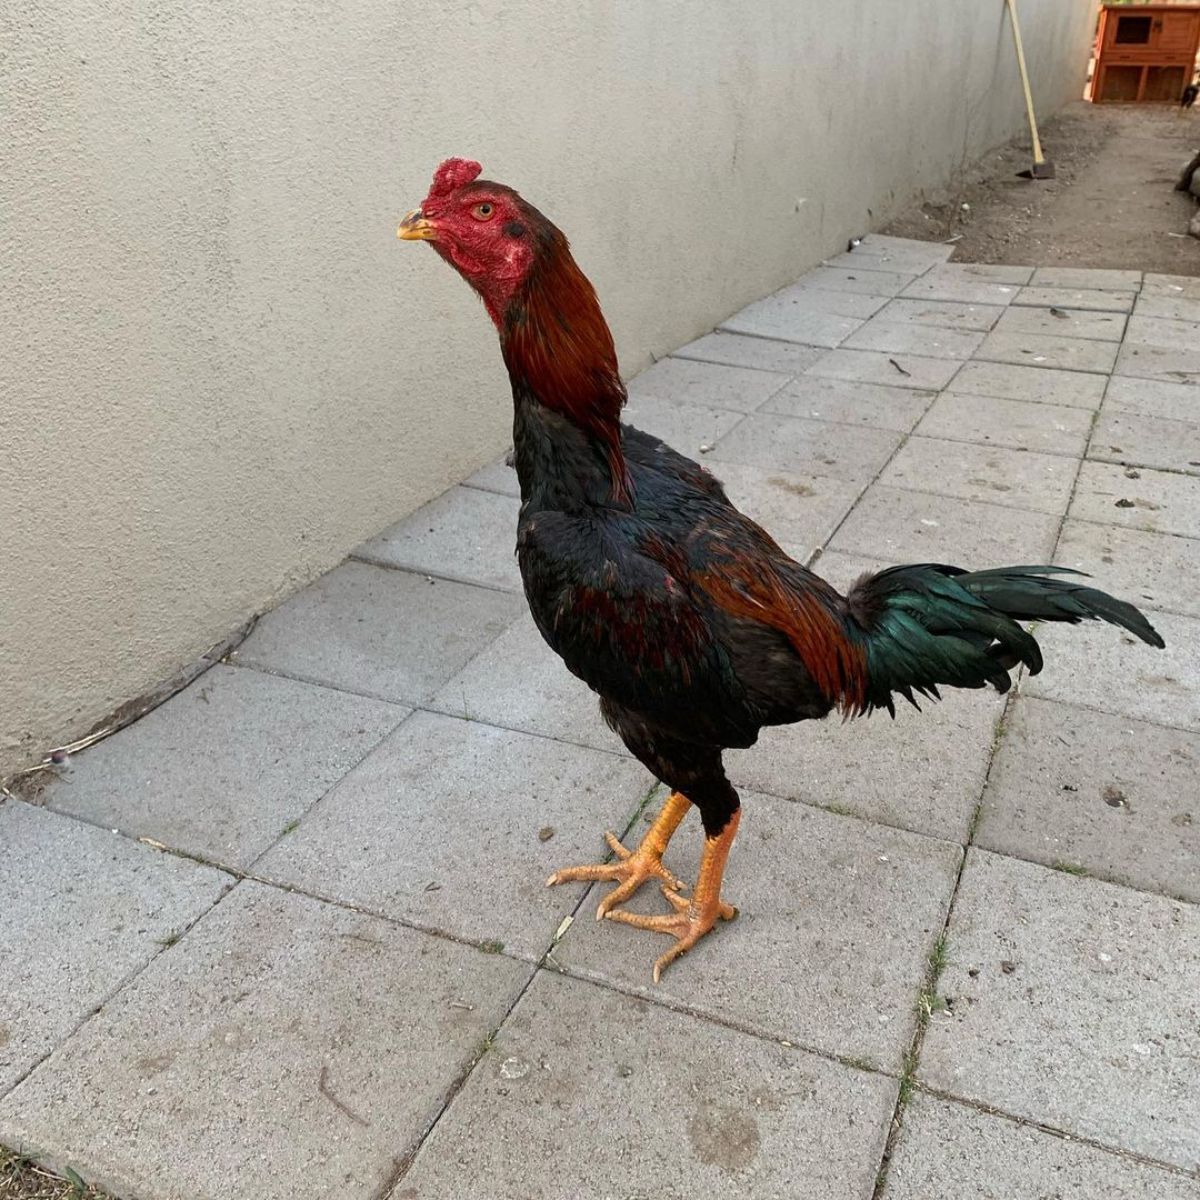 A tall Ga Noi rooster standing on a pavement.